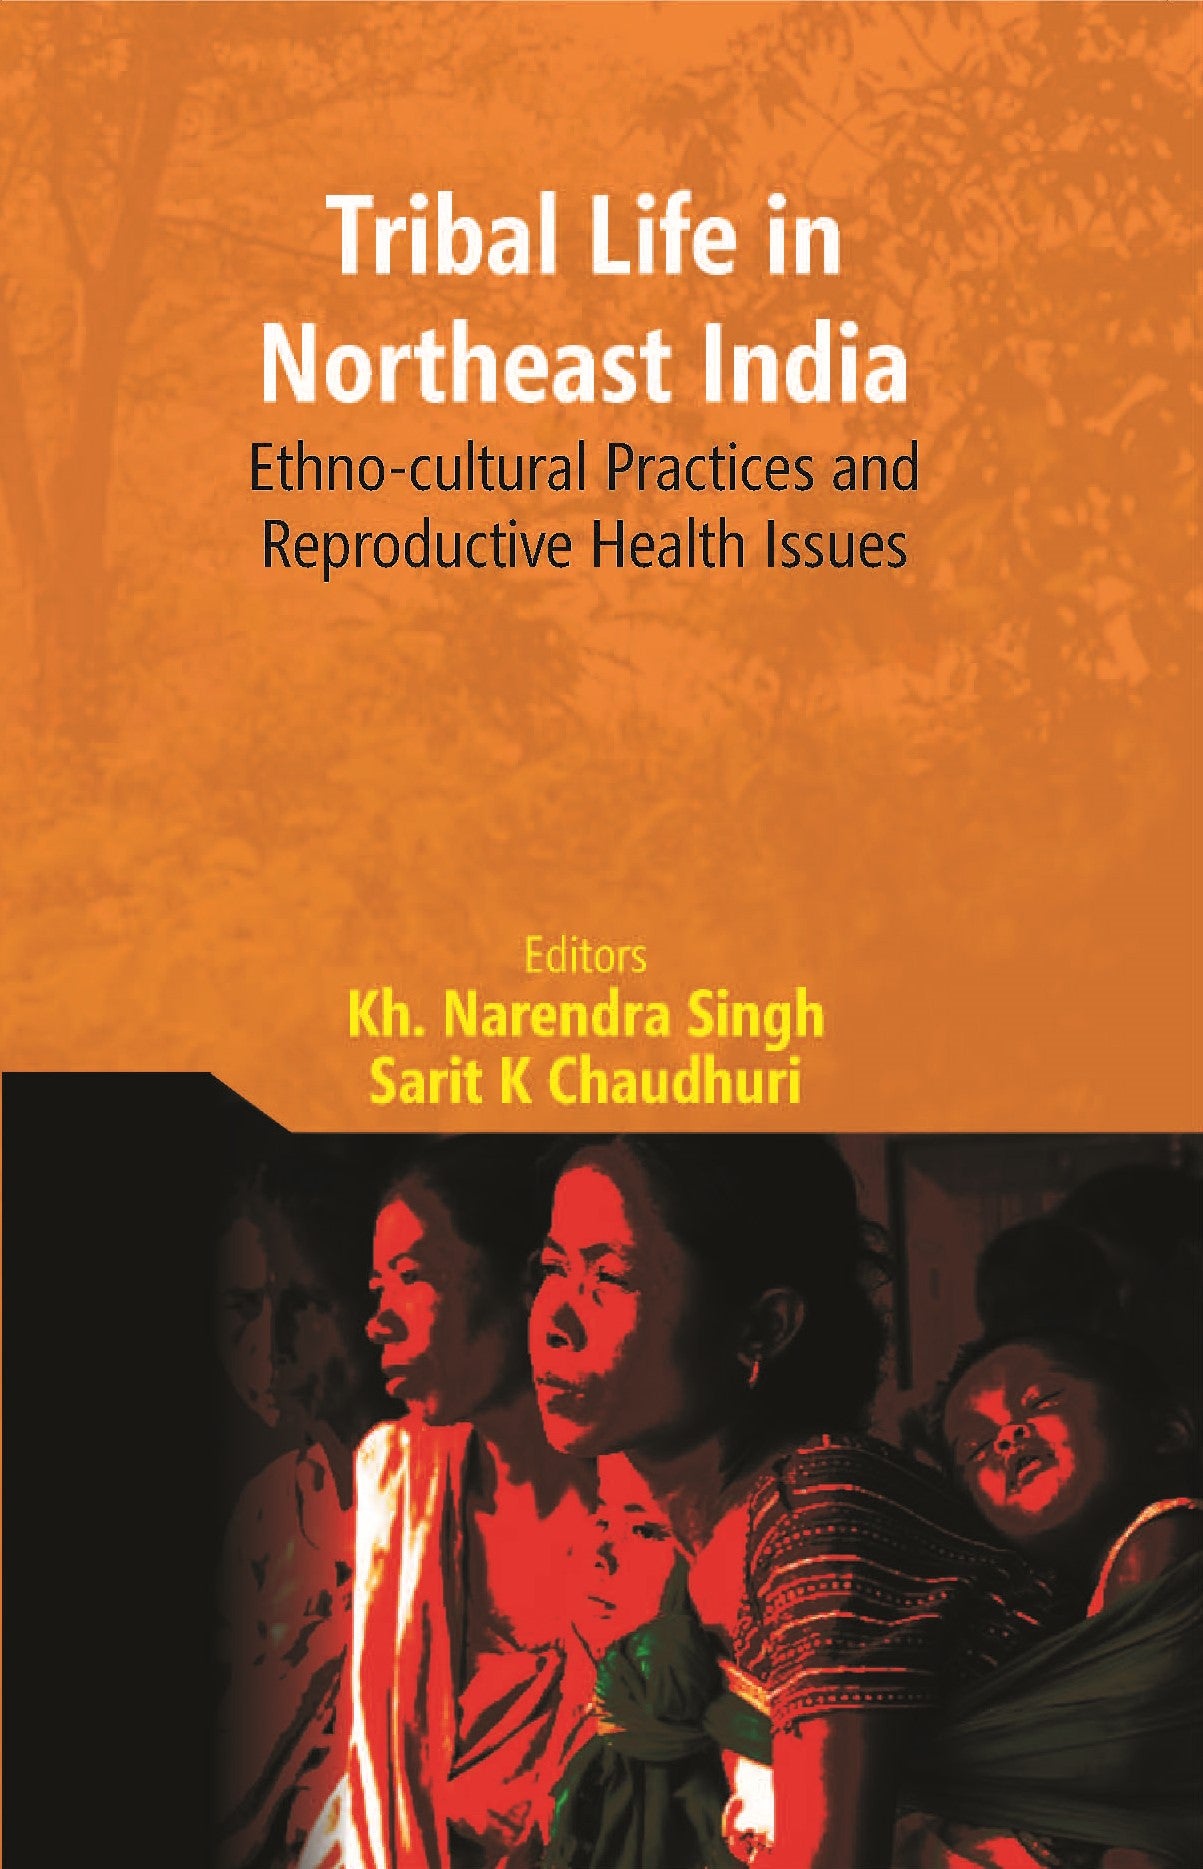 Tribal Life in Northeast India: Ethno-Cultural Practices and Reproductive Health Issues [Hardcover]